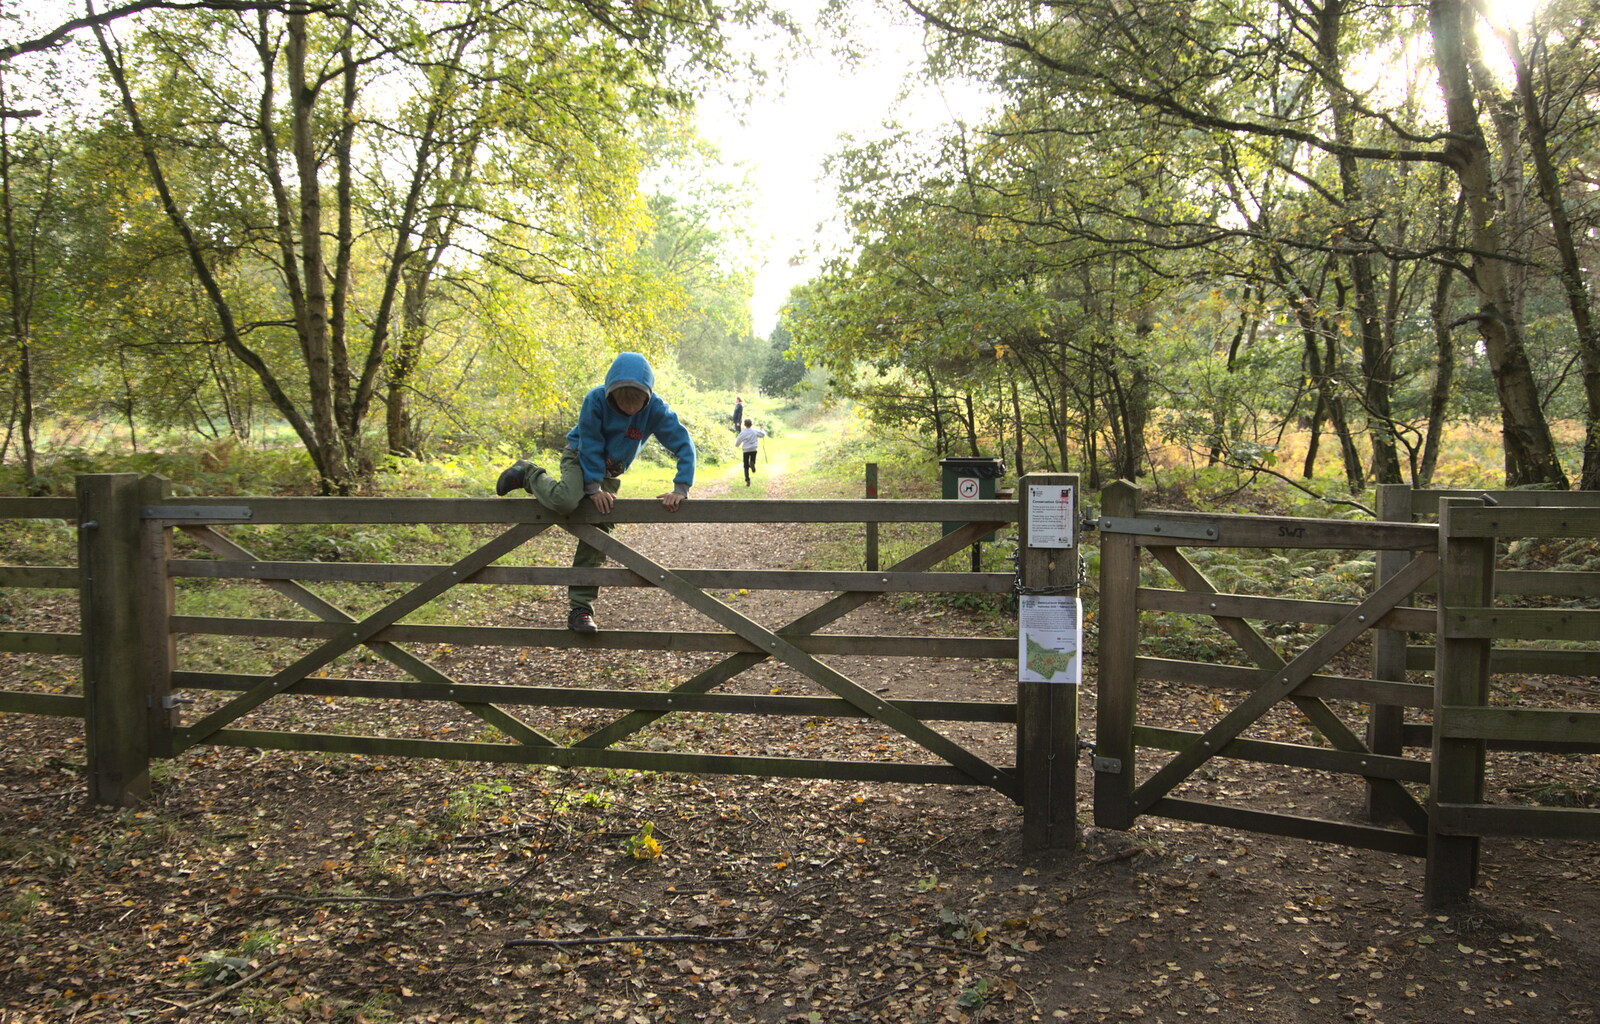 Harry clambers over a gate from Evidence of Autumn: Geocaching on Knettishall Heath, Suffolk - 7th October 2018